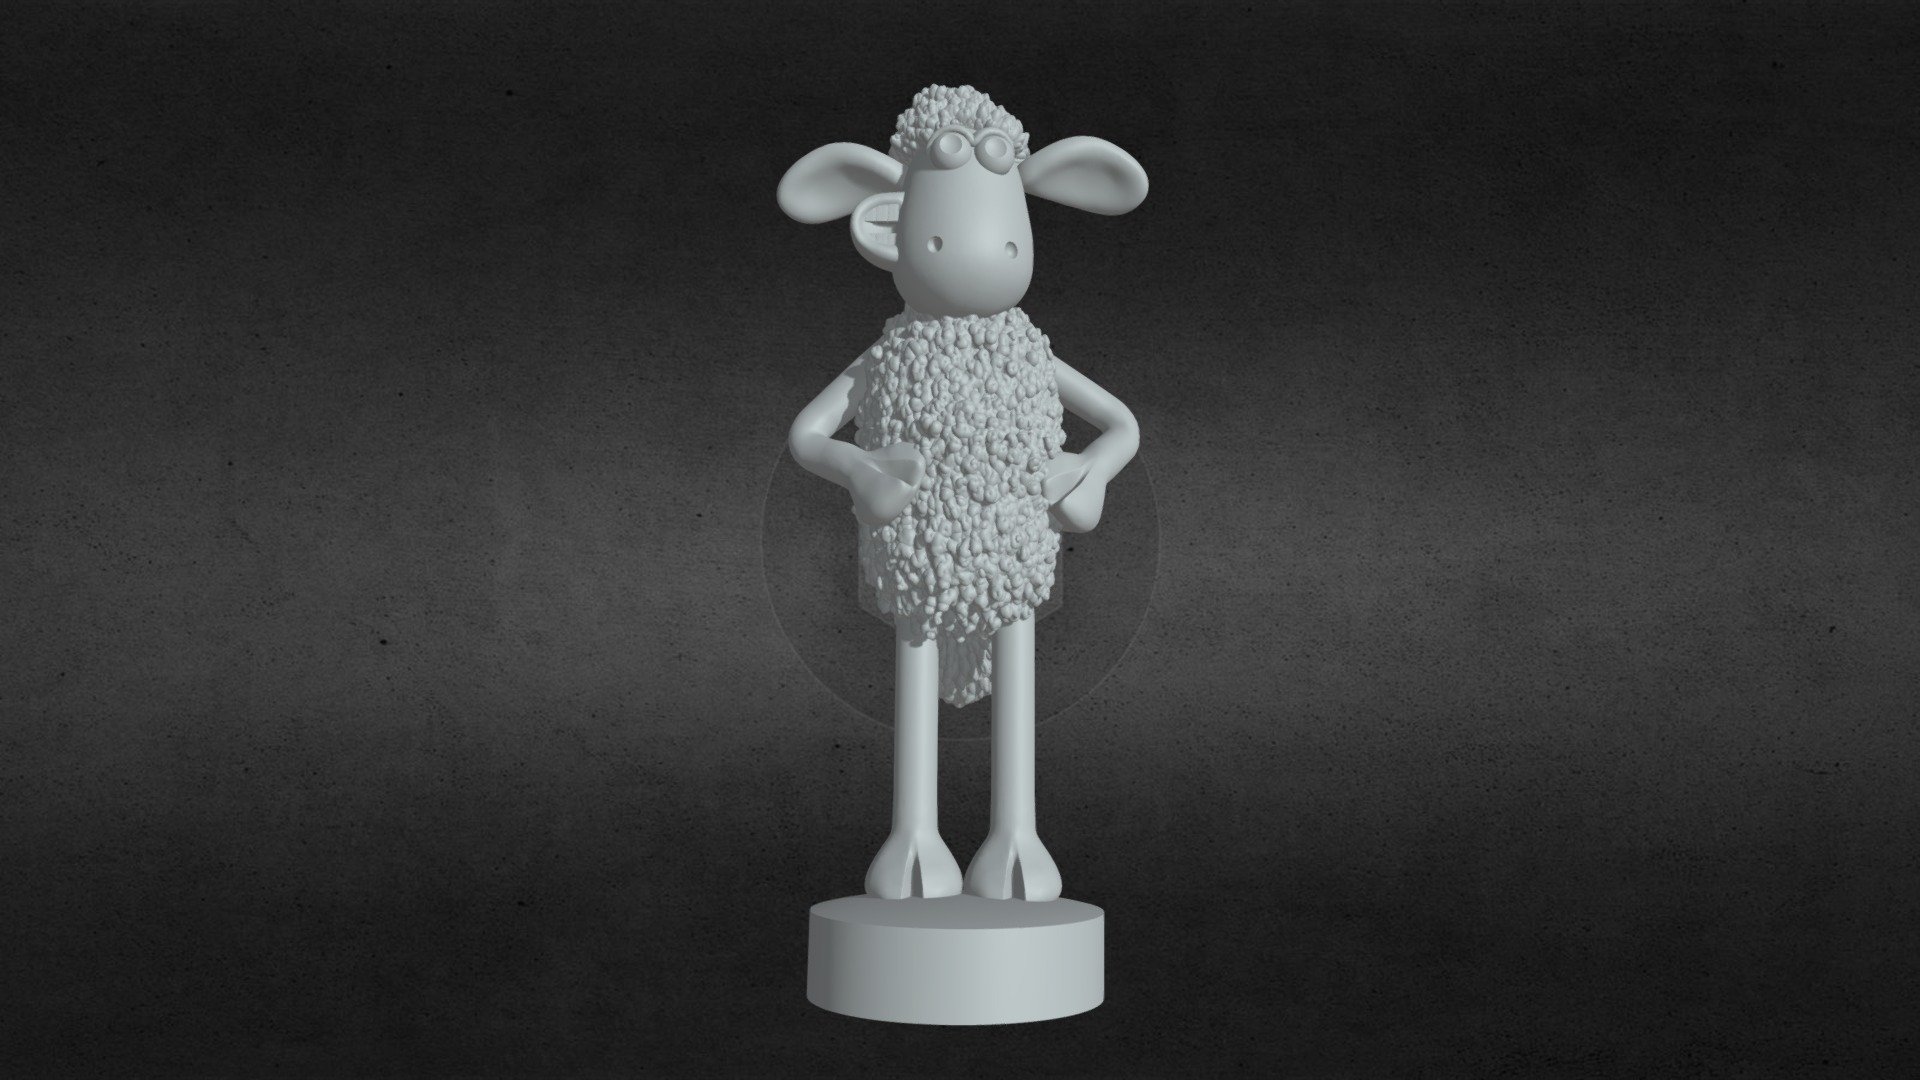 3d Printable model of Shaun the Sheep 6 cm toll. 
Need to be supported for printing 3d model